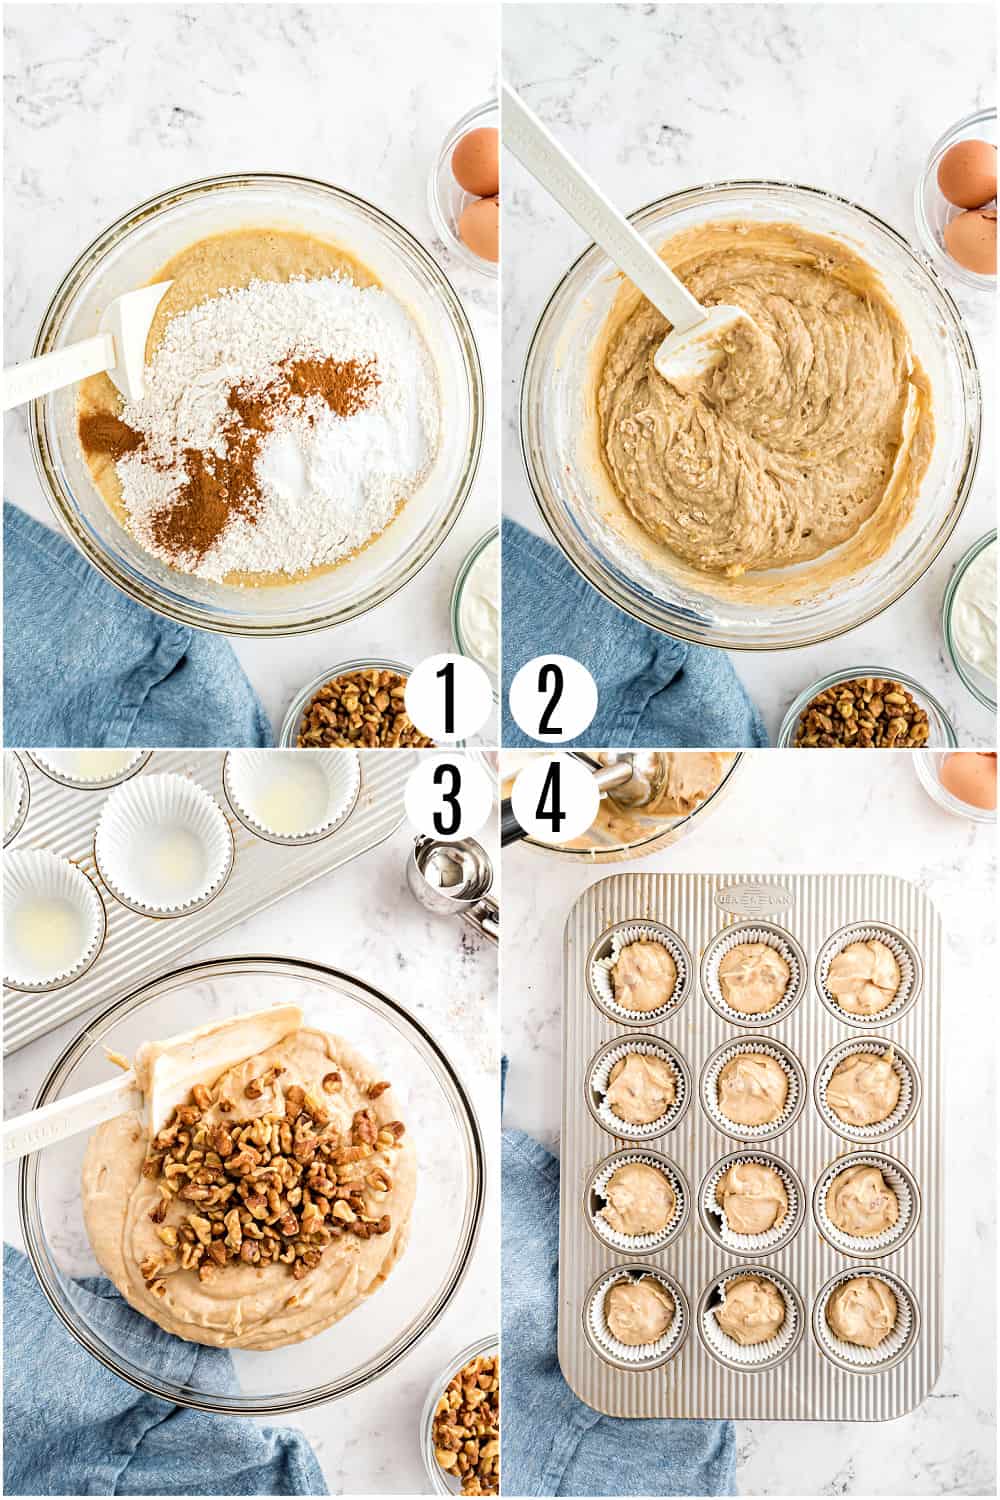 Step by step photos showing how to make banana nut muffins.